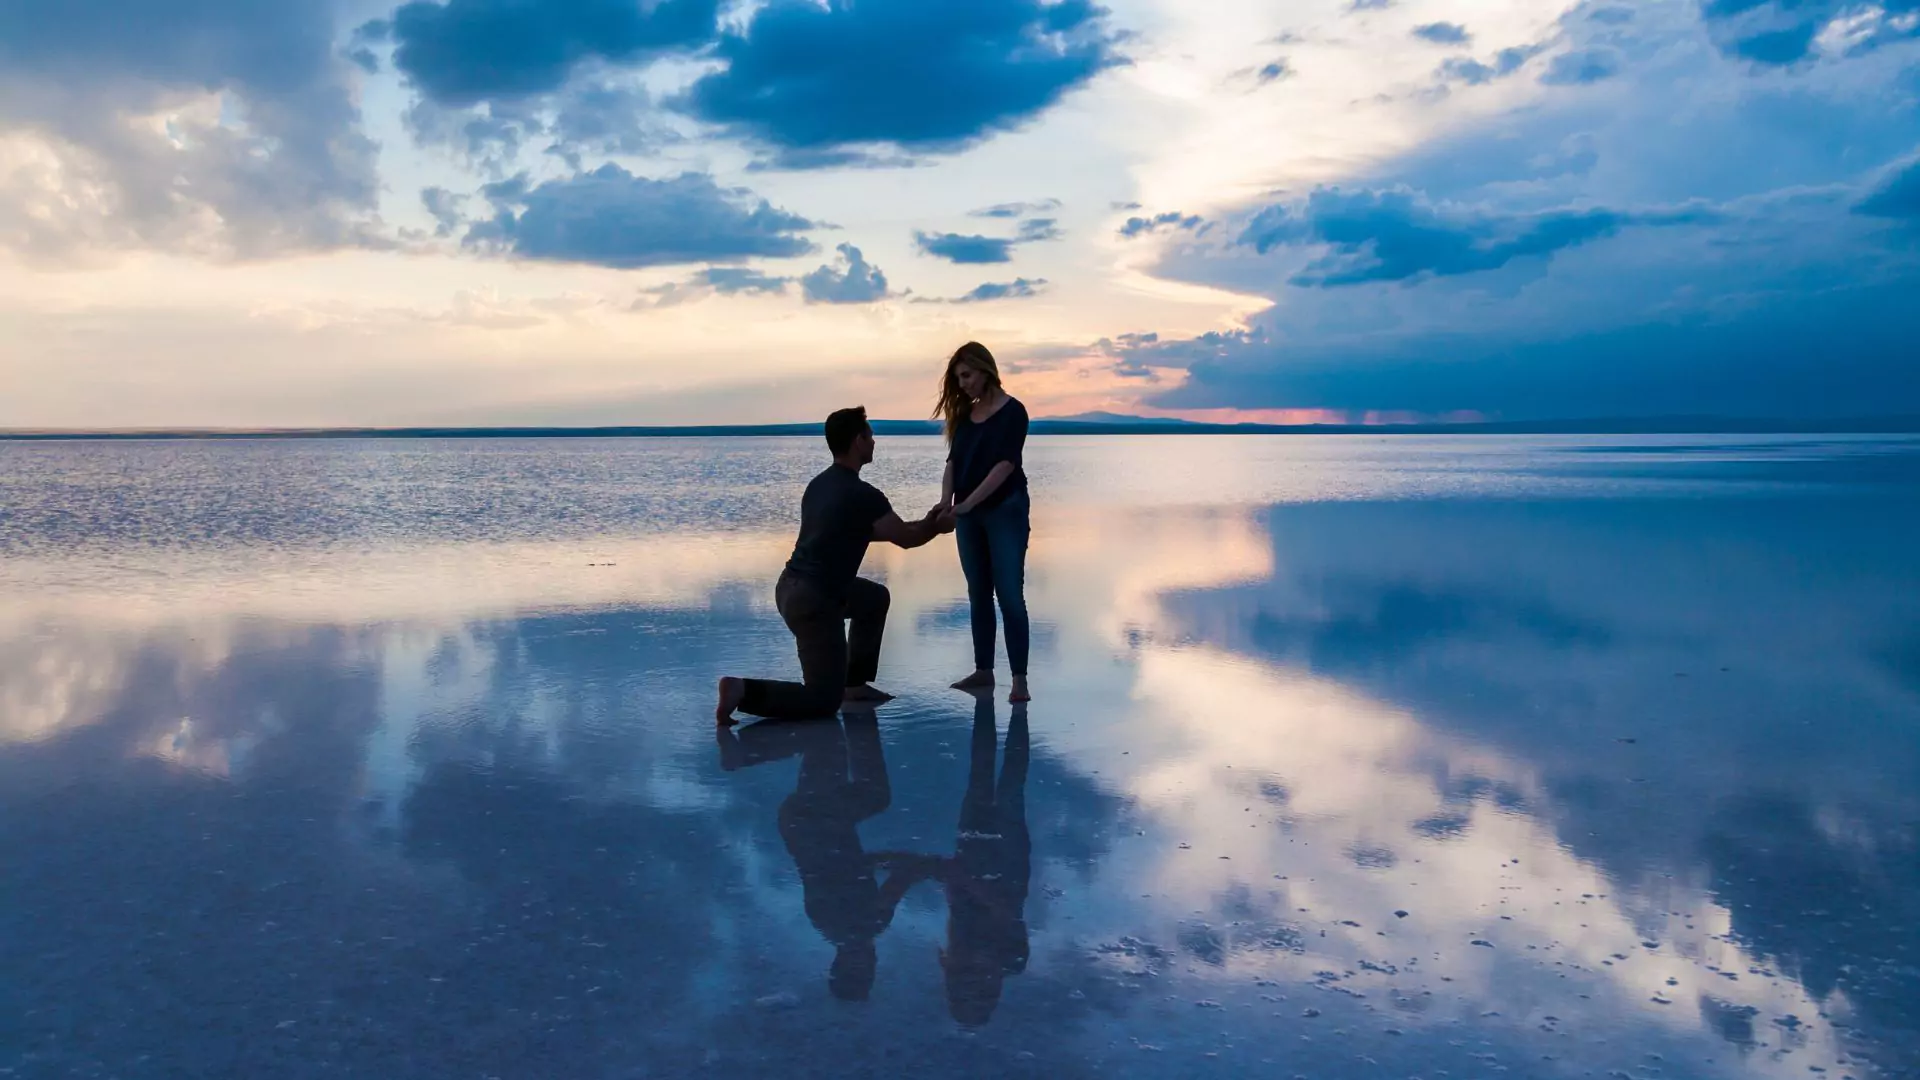 photo of man proposing to girlfriend on the beach at sunset. Get ready to wed by combatting common marriage scams.